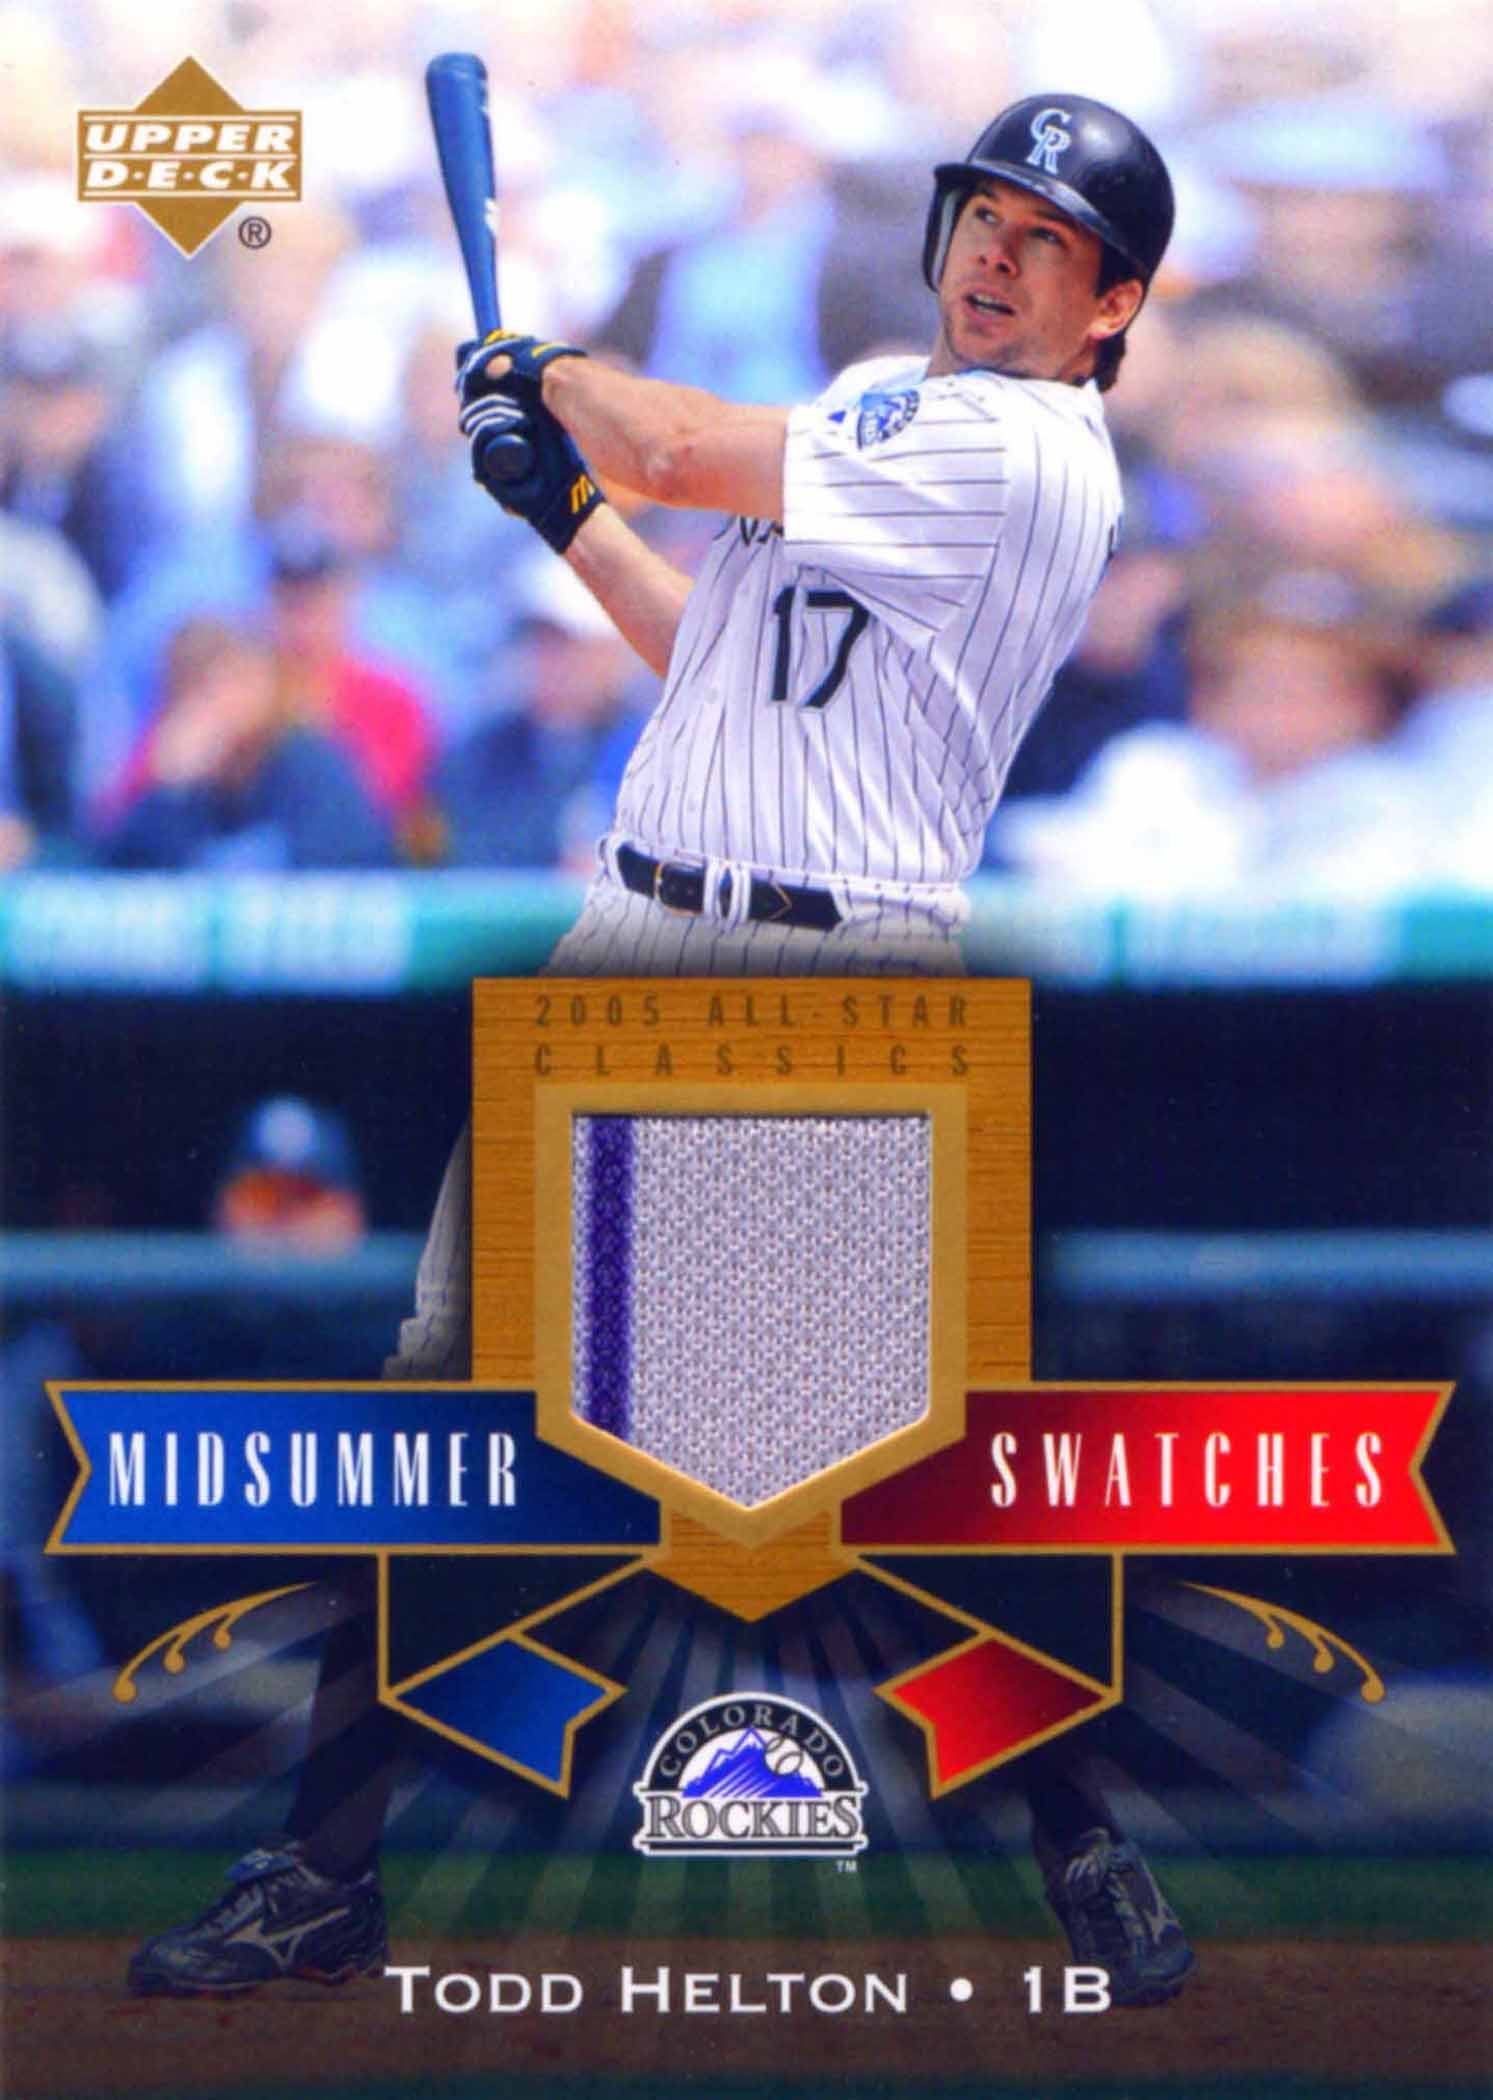 2005 UD All-Star Classics Midsummer Swatches Jersey